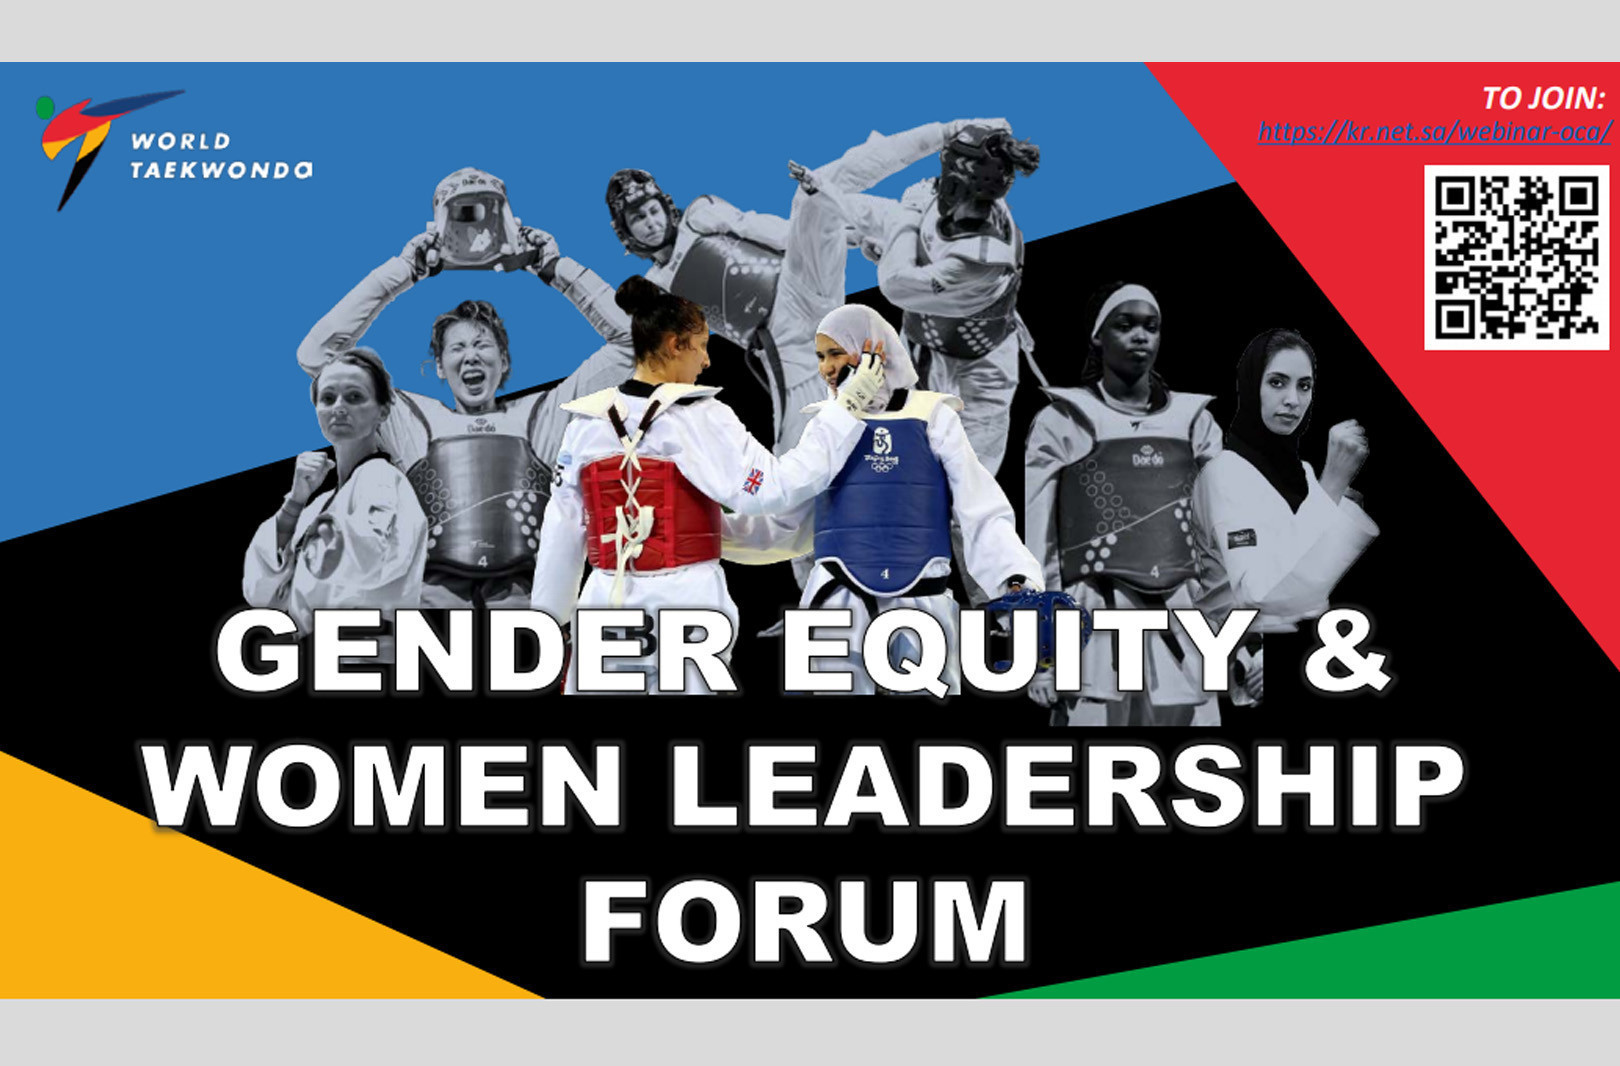 World Taekwondo has confirmed it will hold its second Gender Equity and Leadership Forum ©World Taekwondo